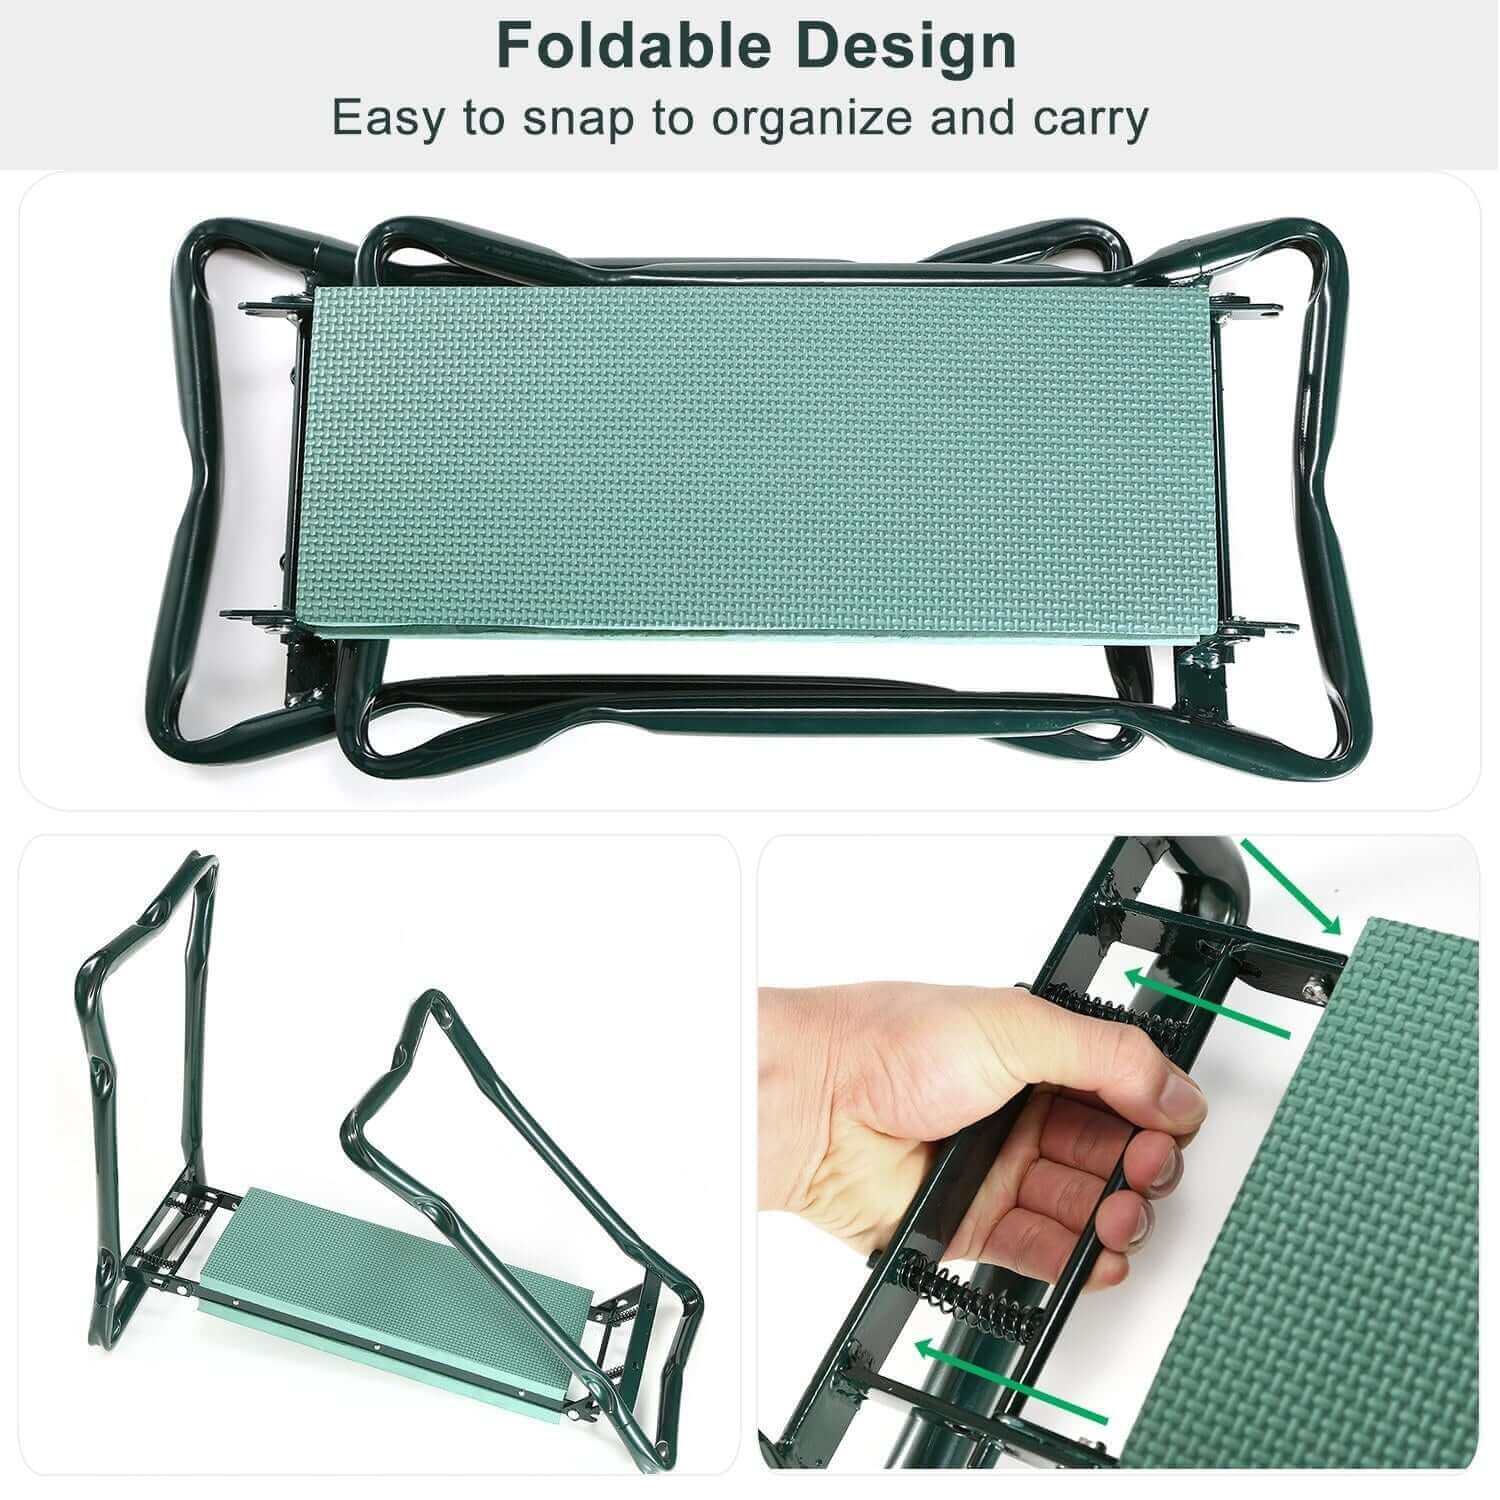 Foldable Garden Kneeler and Seat - 2